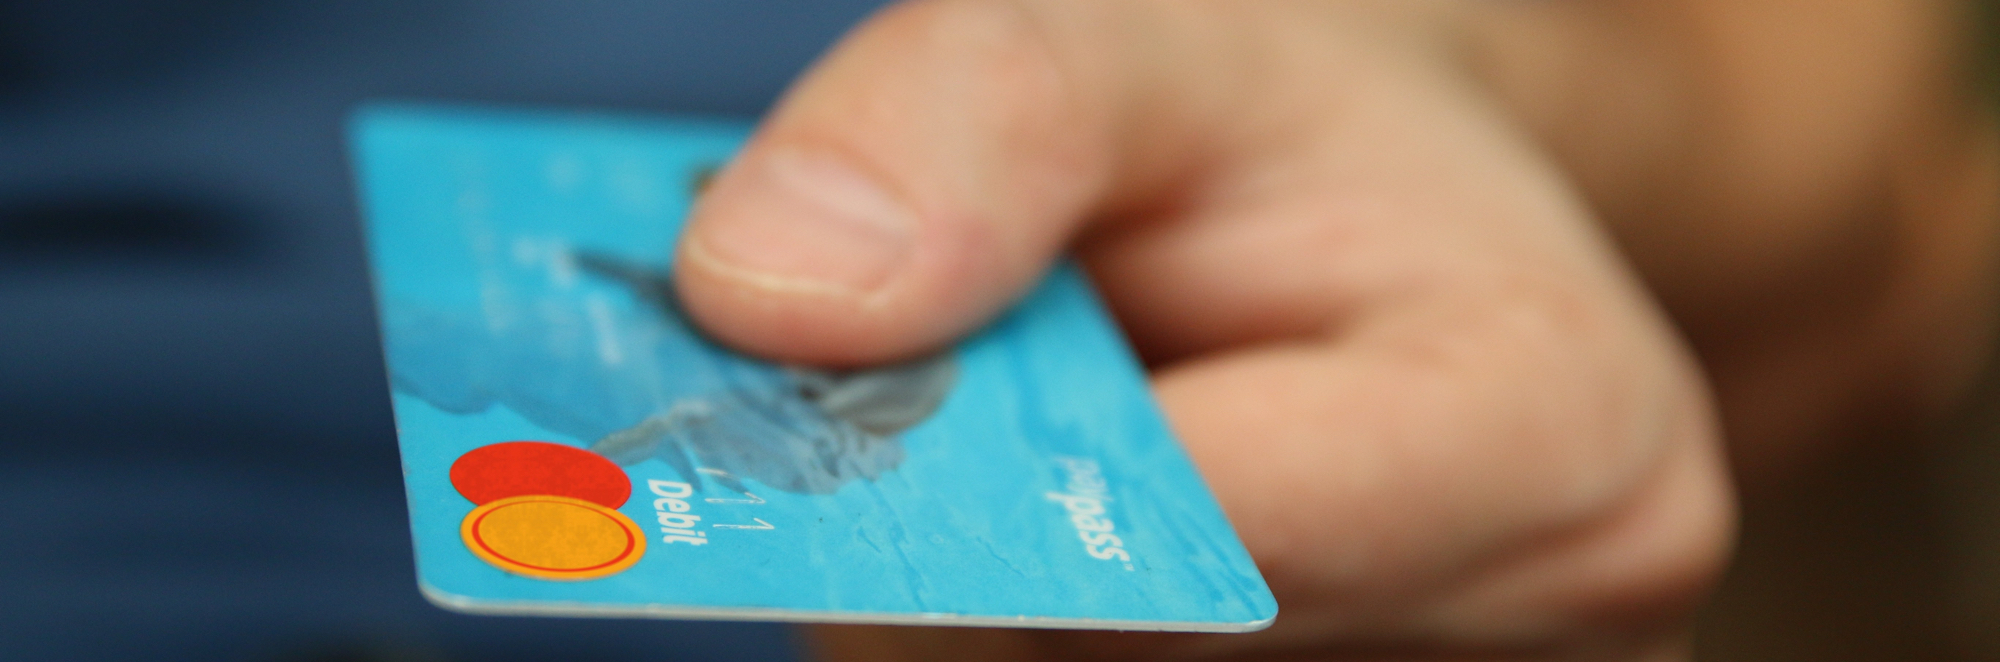 Person holding blue credit card